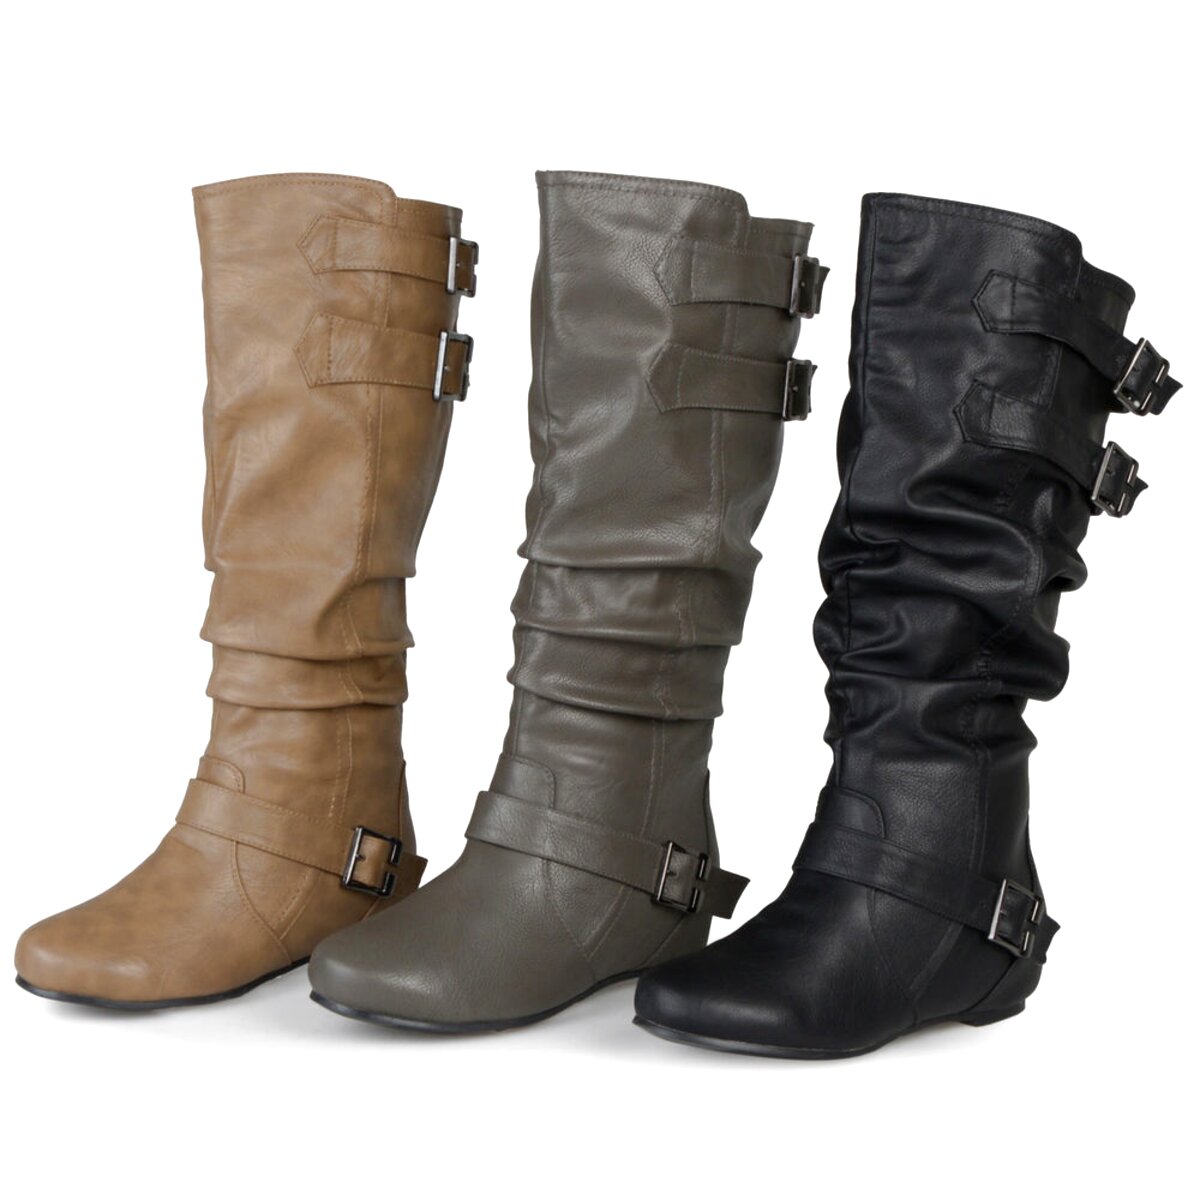 Wide Calf Slouch Boots for sale in UK | View 57 bargains